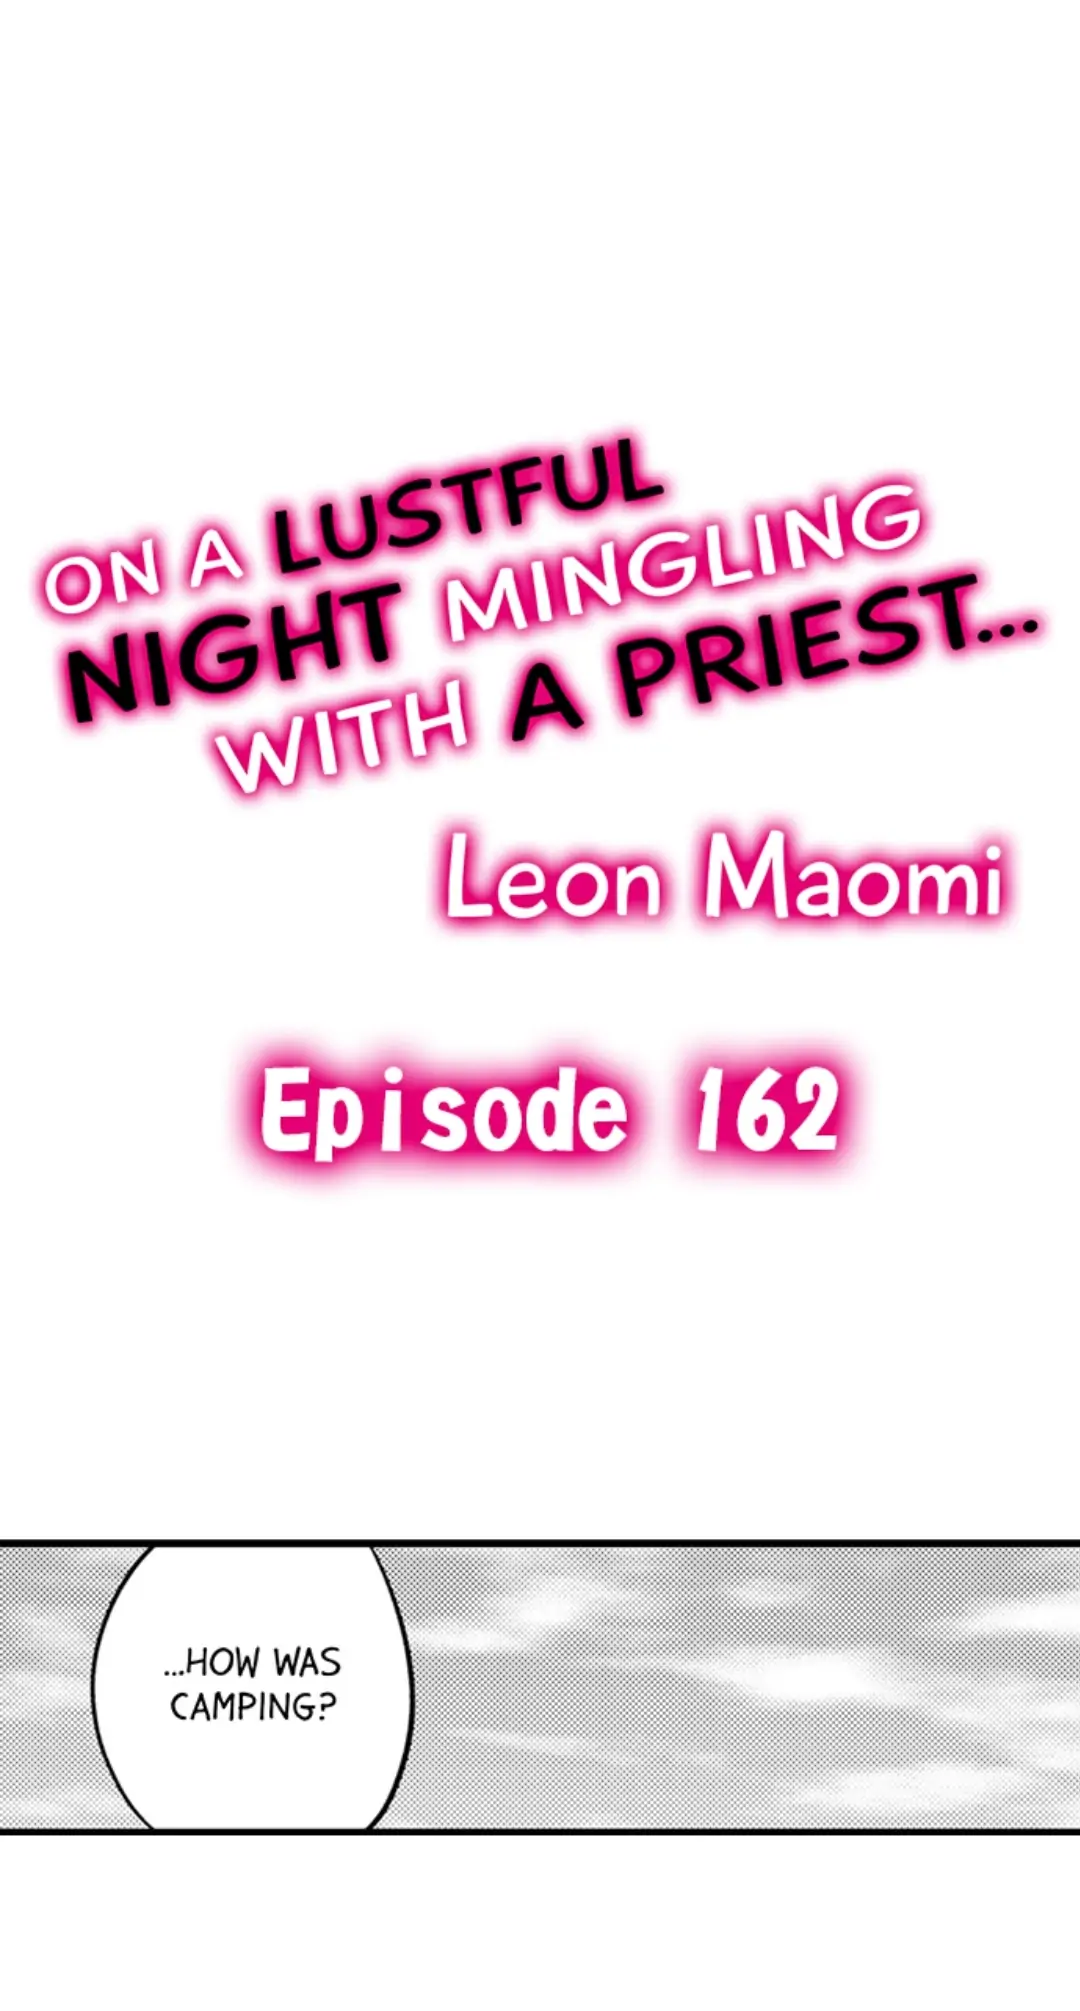 On A Lustful Night Mingling With A Priest - 162 page 1-8f7e4fdb